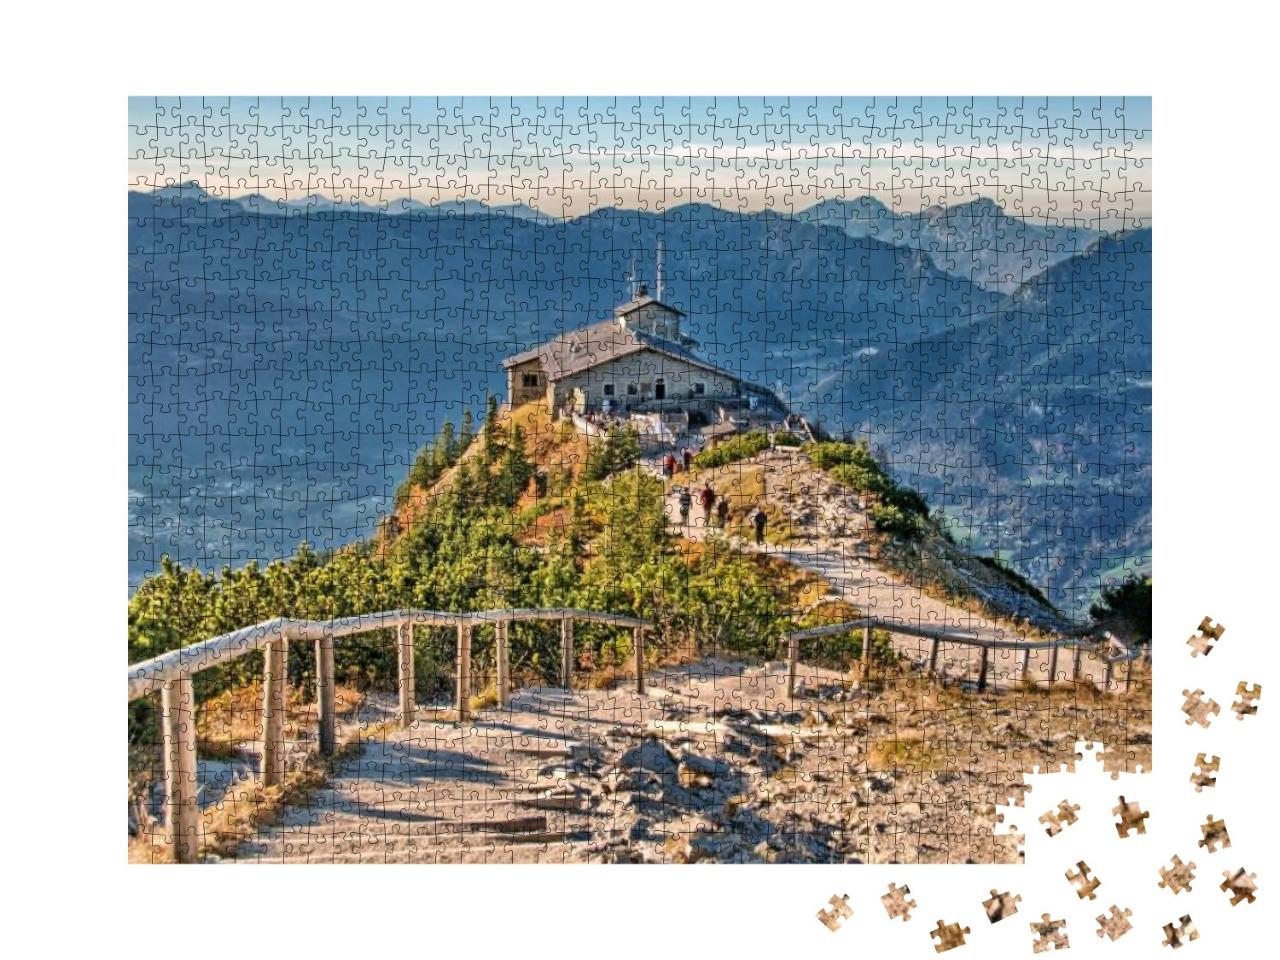 Kehlstein Eagles Nest Berchtesgaden Bavaria Germany Alps... Jigsaw Puzzle with 1000 pieces